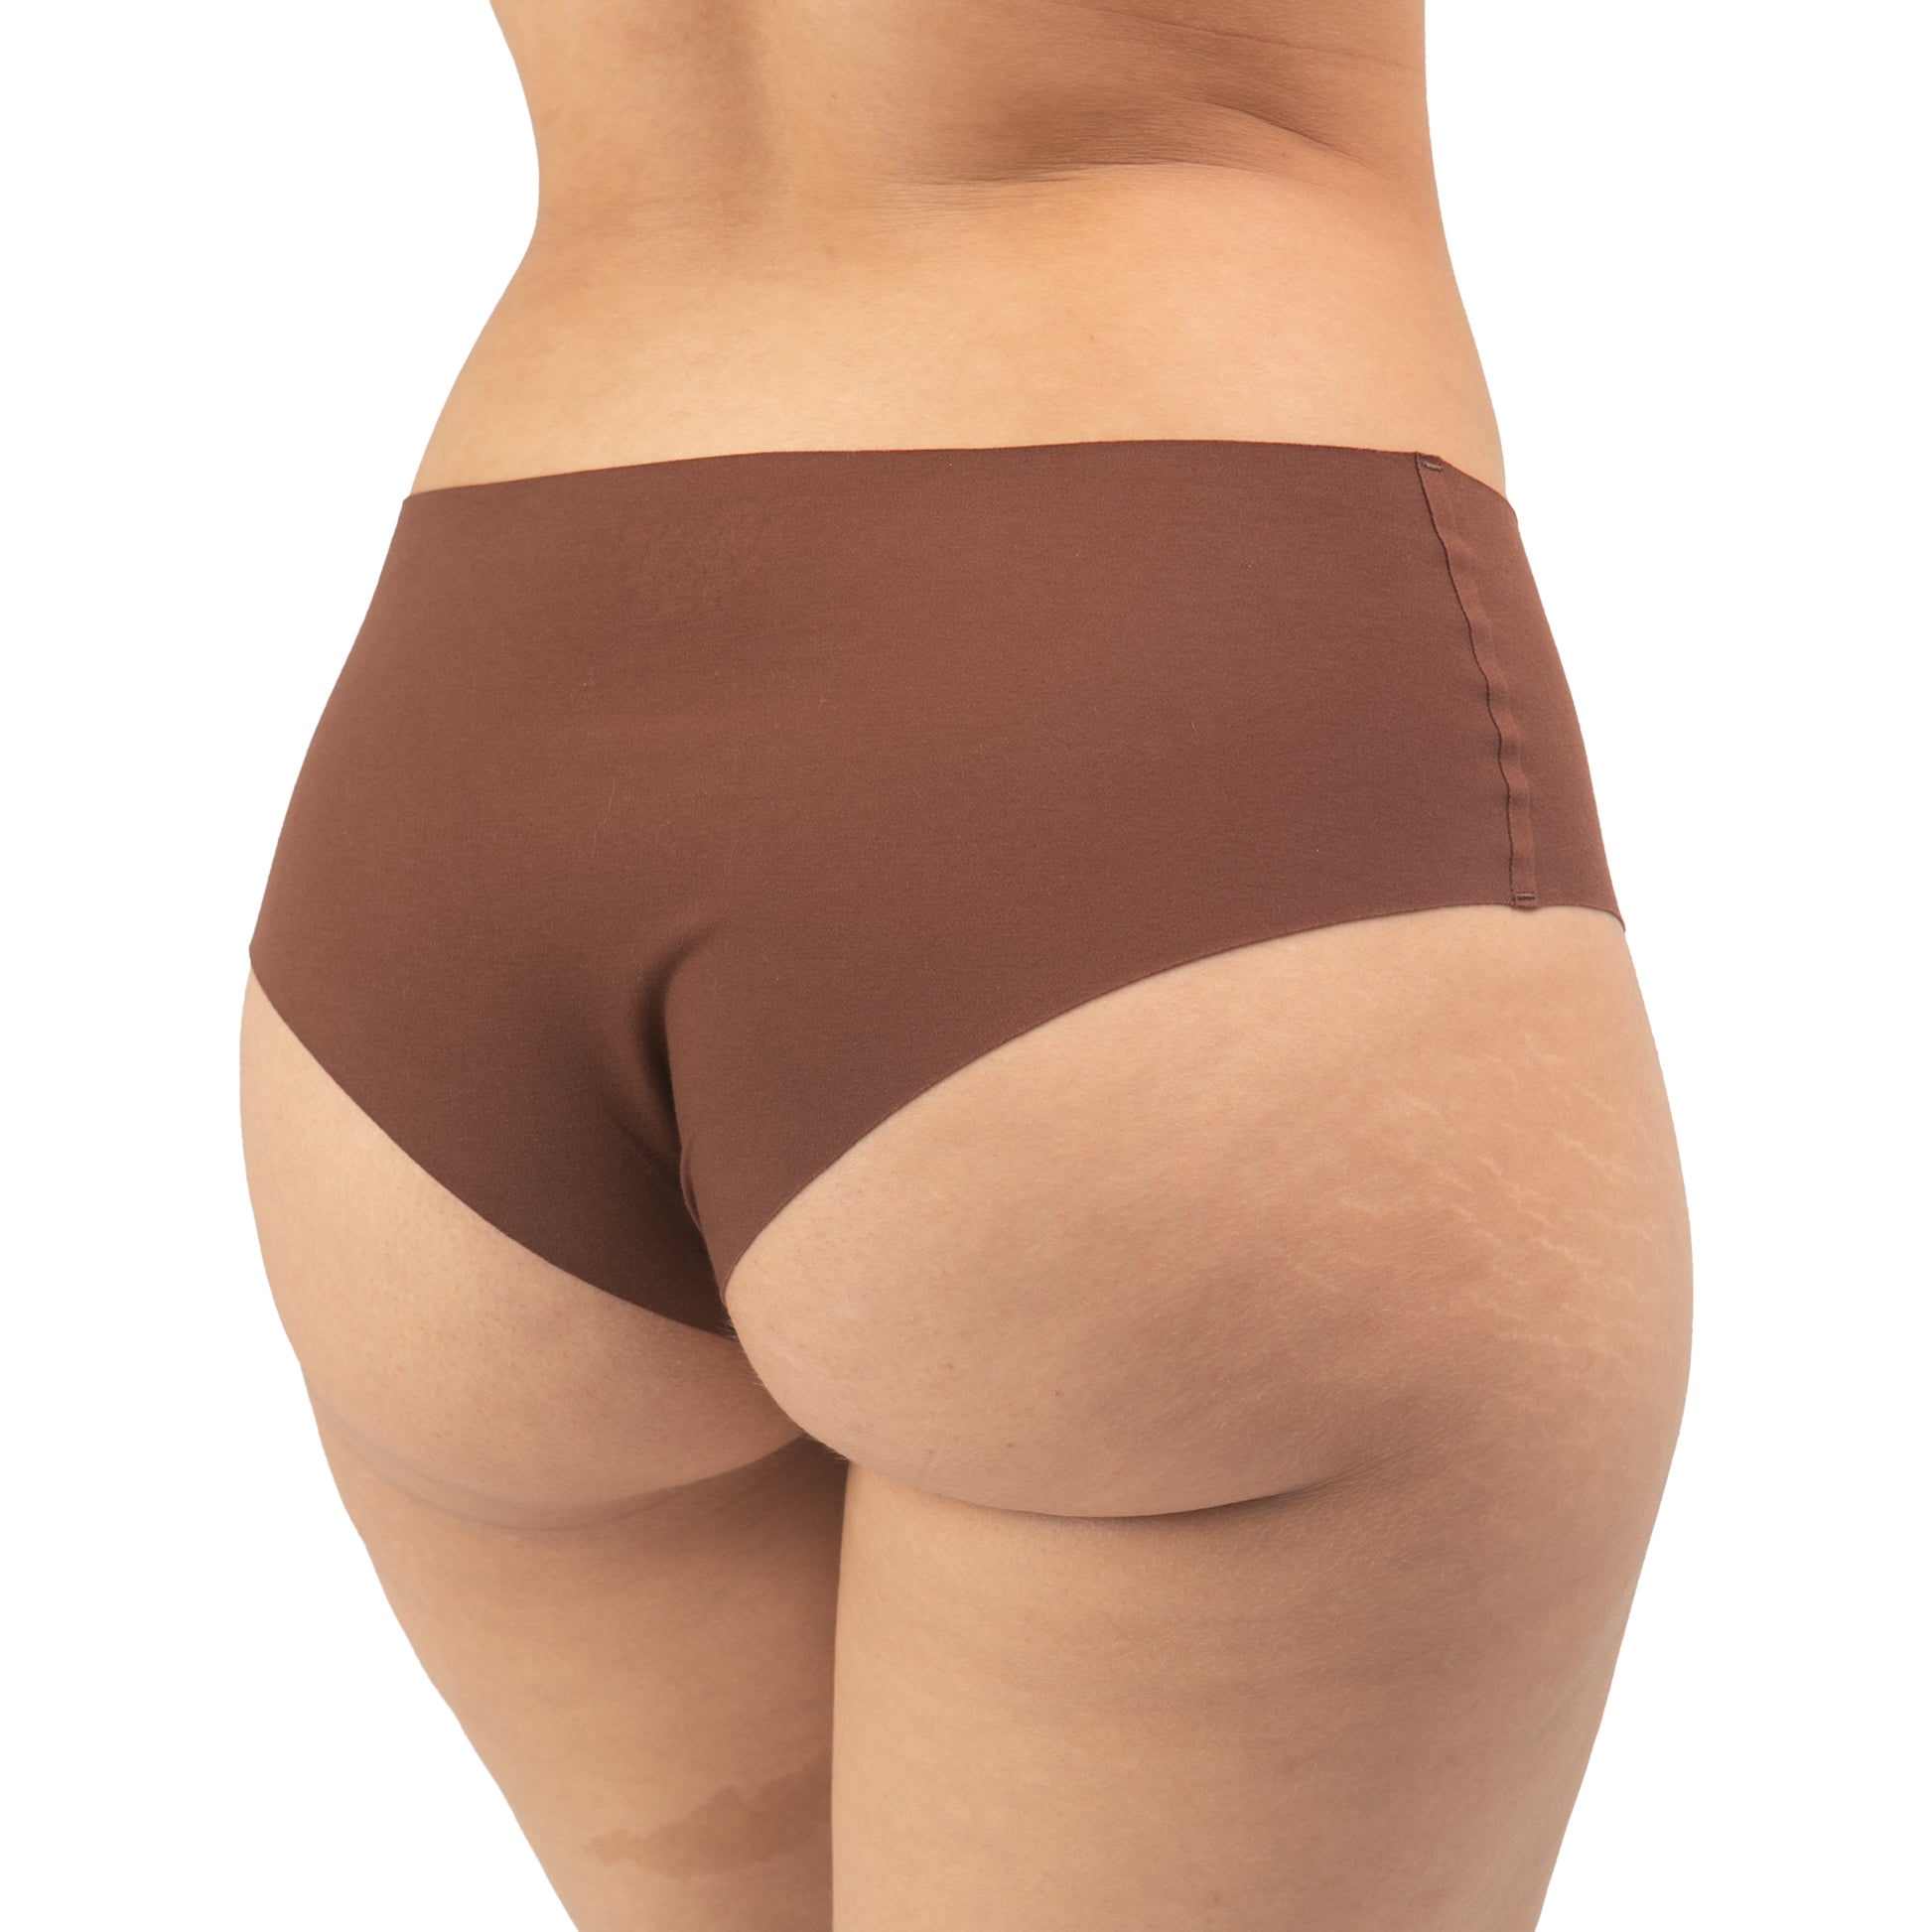 Women's Organic Cotton Low Rise Hipster underwear in color Mocha - Back View